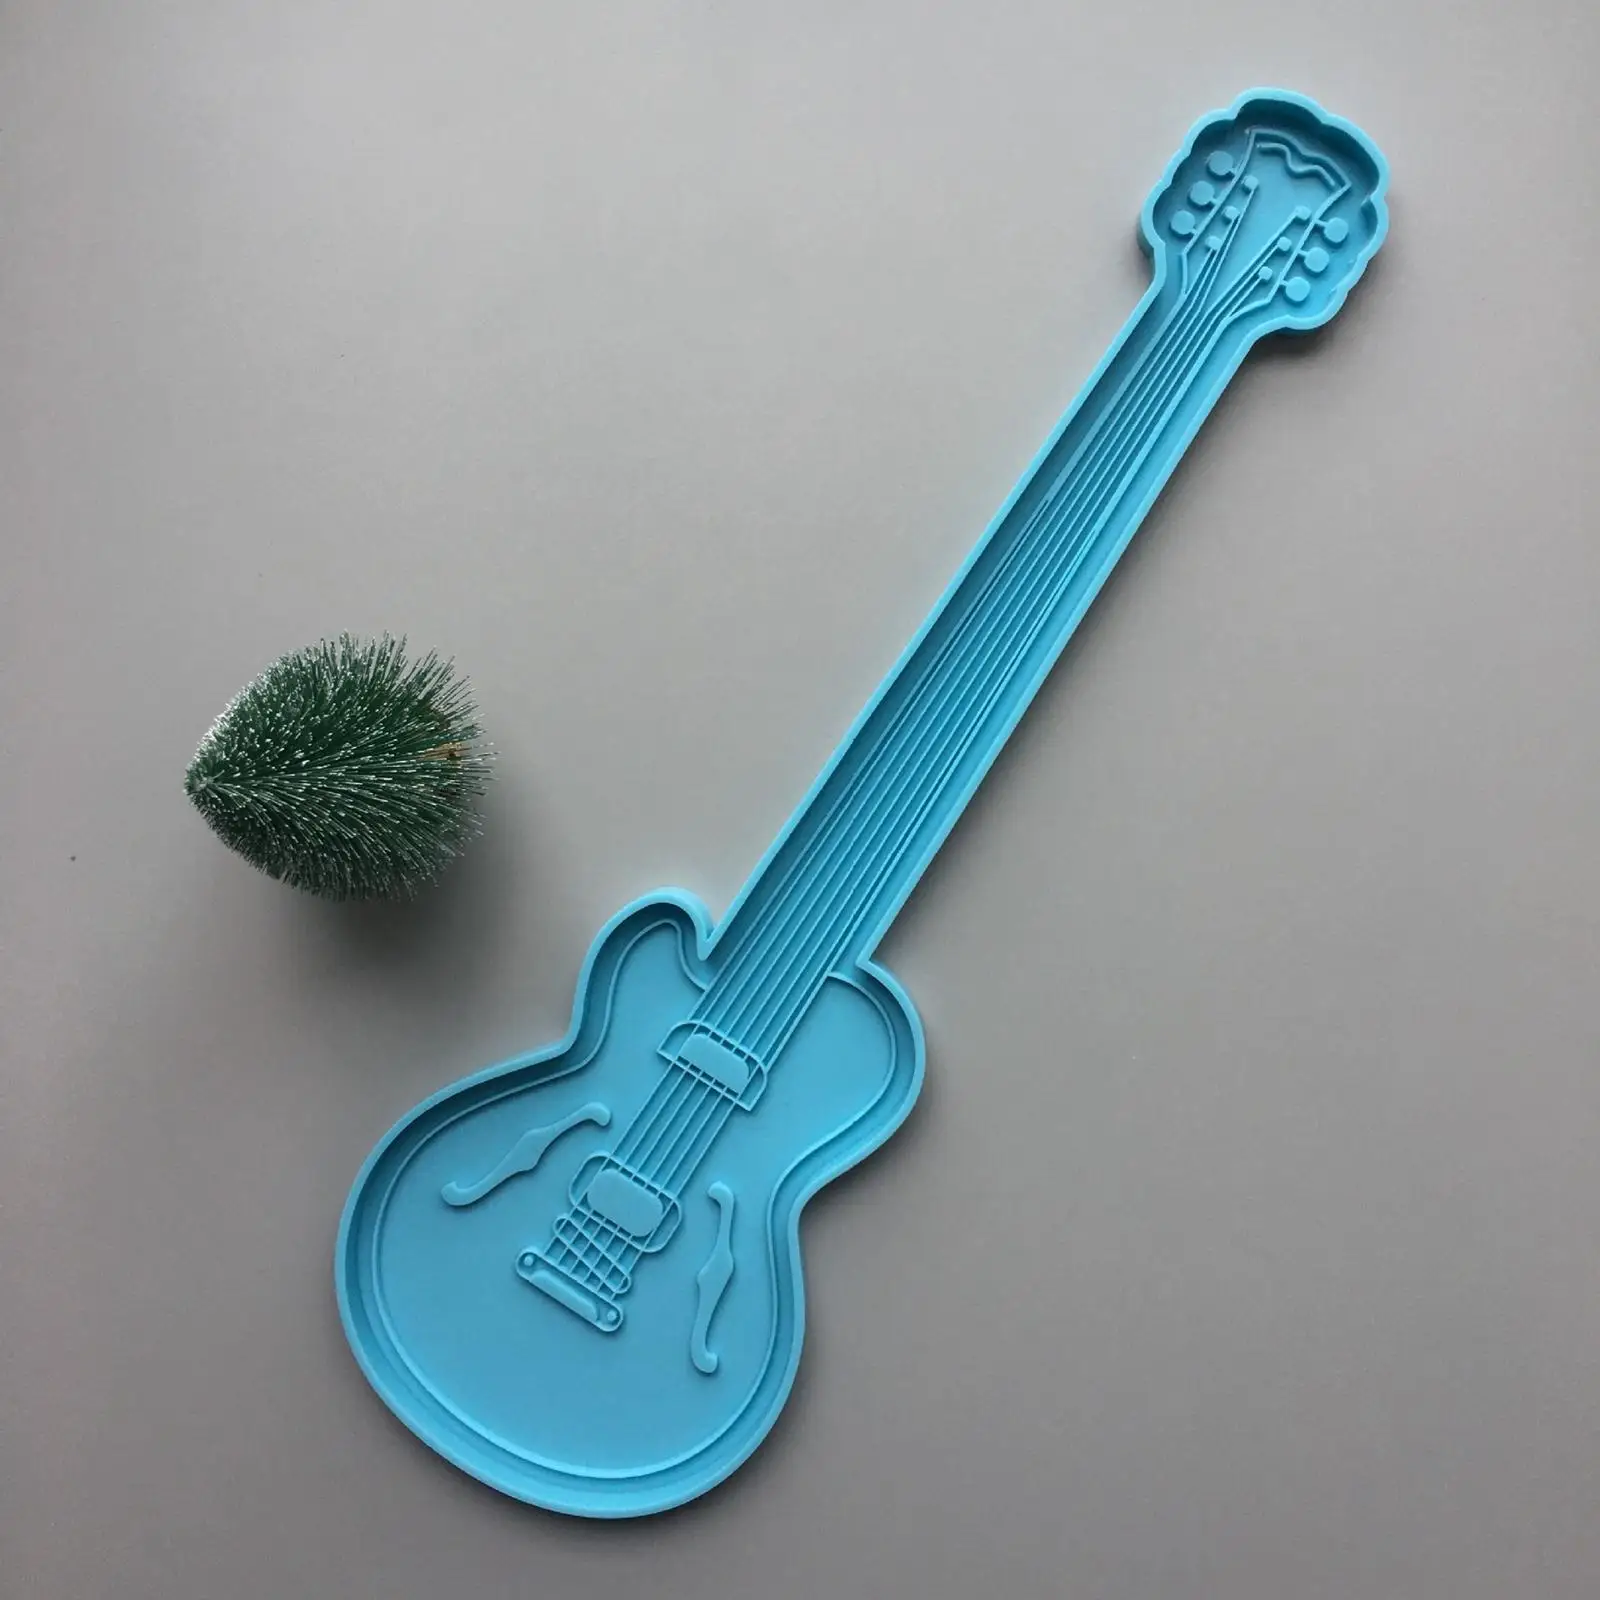 40.5x20.3cm Guitar  Reusable Jewelry Making  Flexible Low  Easy to Separate DIY Tool  Silica   Gift